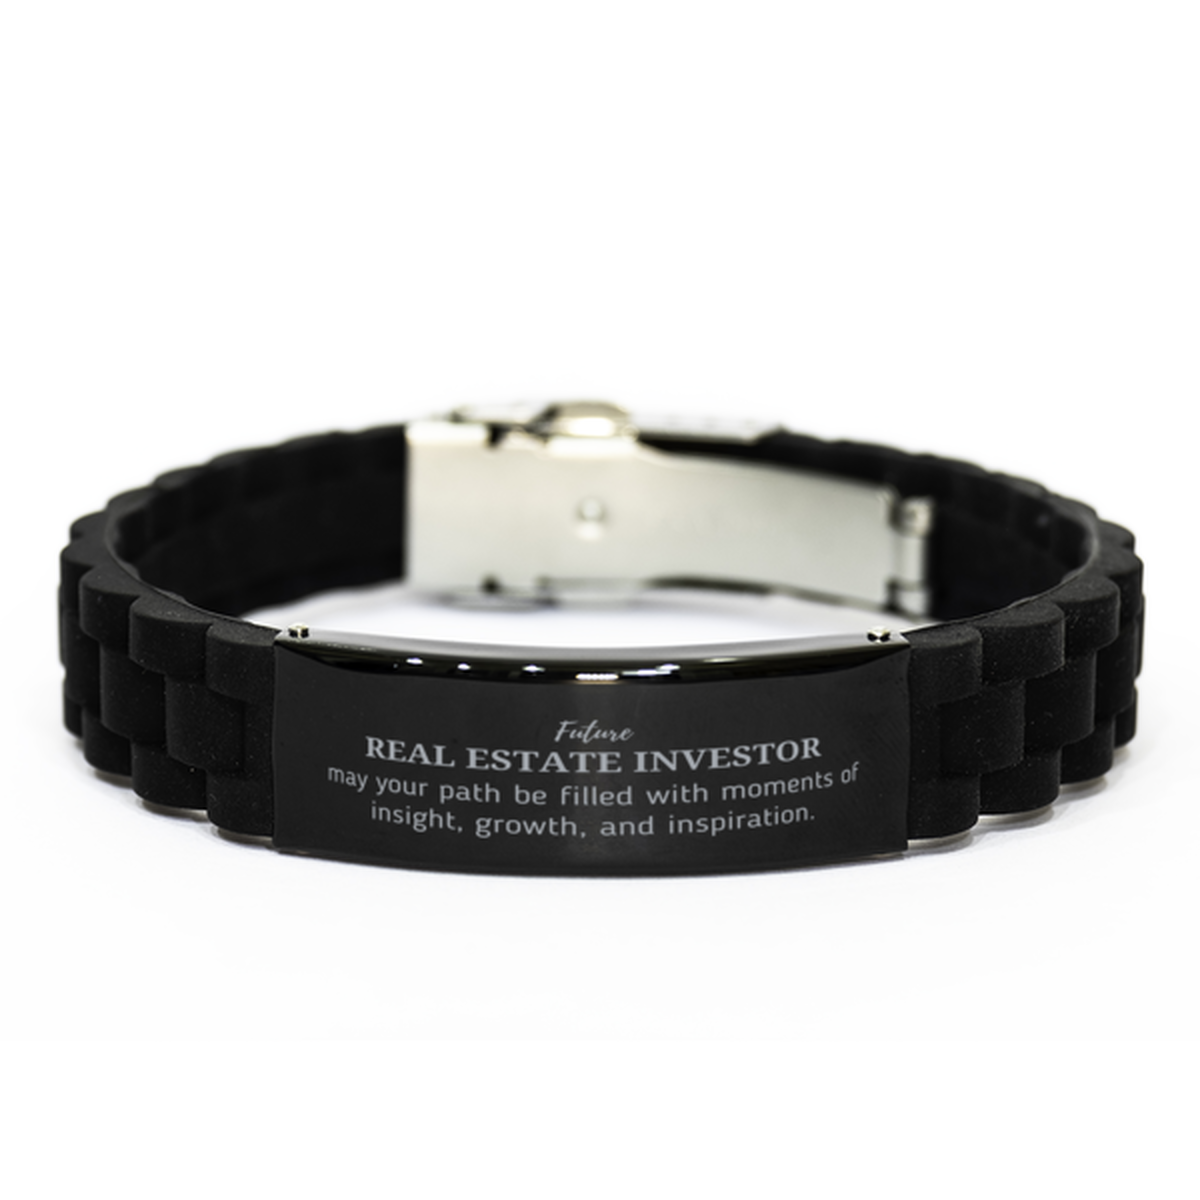 Future Real Estate Investor Gifts, May your path be filled with moments of insight, Graduation Gifts for New Real Estate Investor, Christmas Unique Black Glidelock Clasp Bracelet For Men, Women, Friends